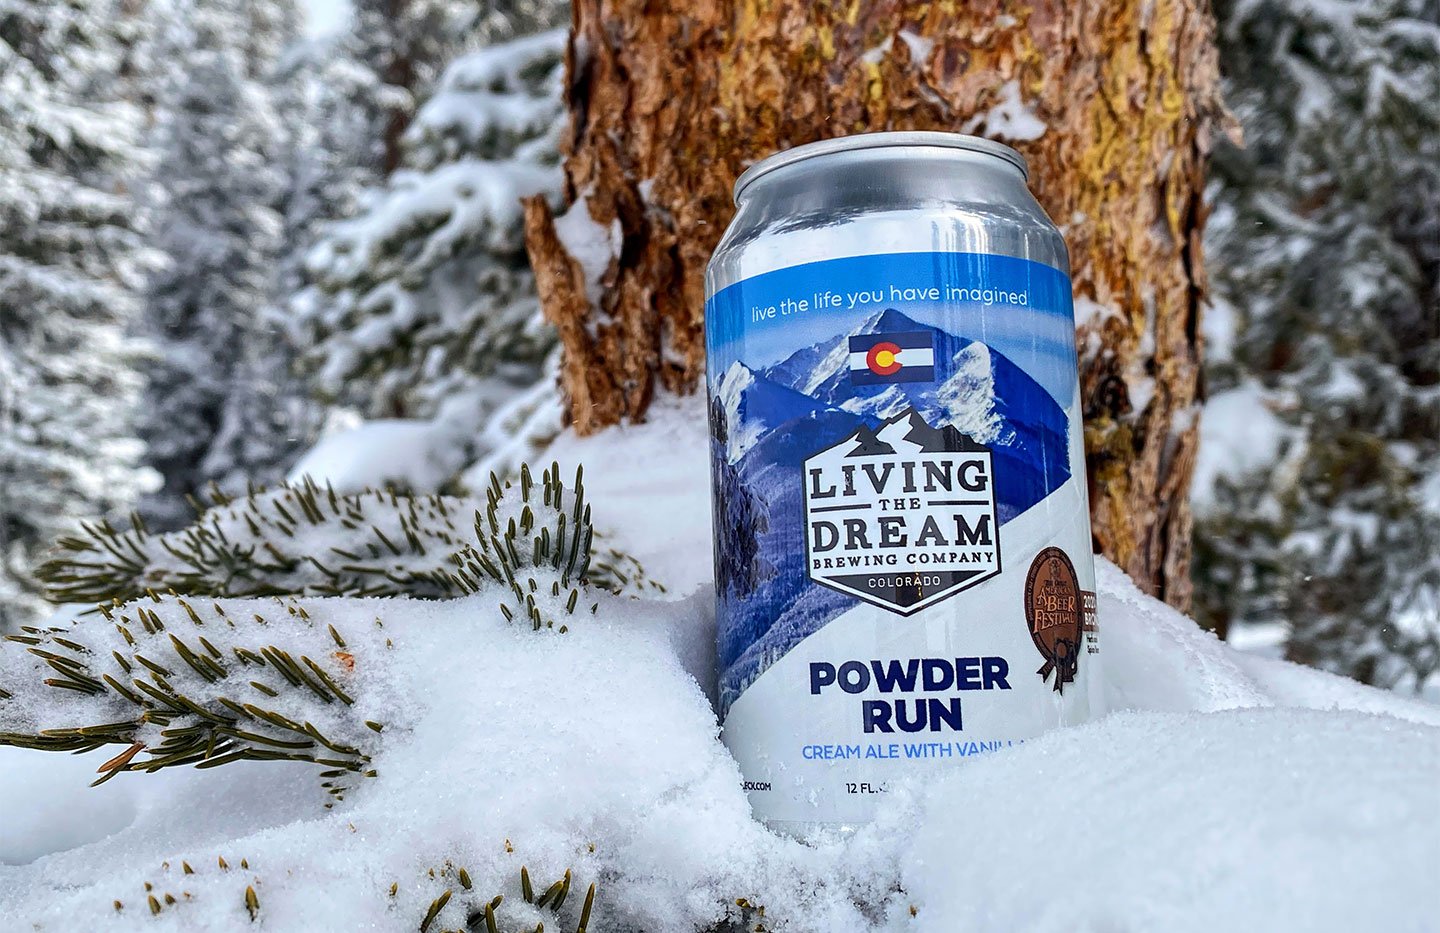 Can of Powder Run Cream Ale beer sitting in a snow pile at the base of a pine tree